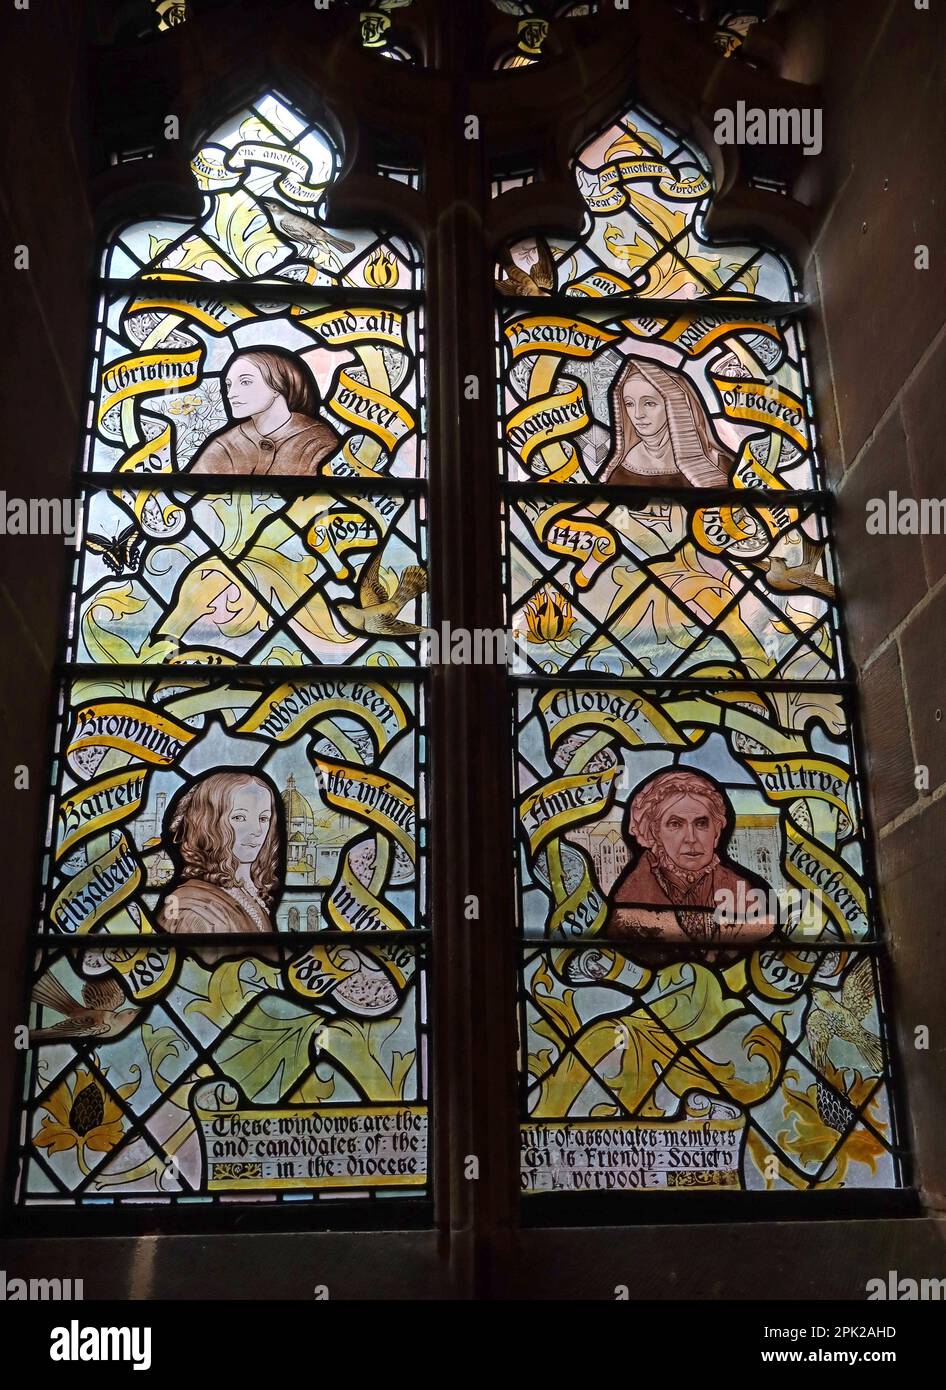 Cadeau de filles friendly Society vitrail vitrail dame chapelle, Liverpool anglican Cathedral, St James' Mount, Liverpool, Merseyside, Angleterre, Royaume-Uni, L1 Banque D'Images